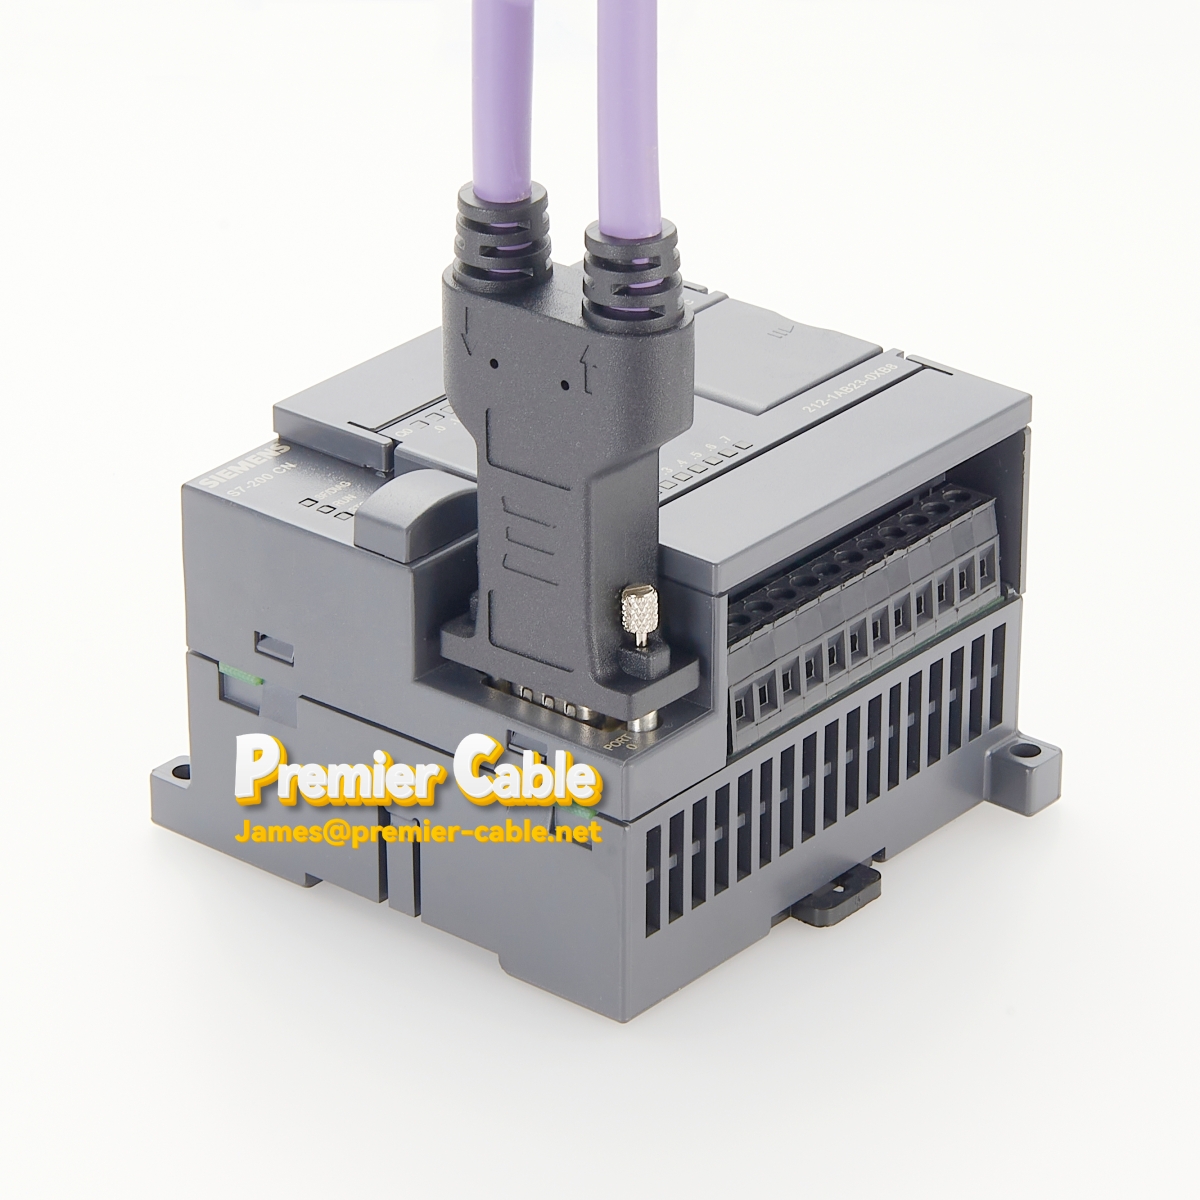 Profibus Connector with M12 Axial Cable Outlet